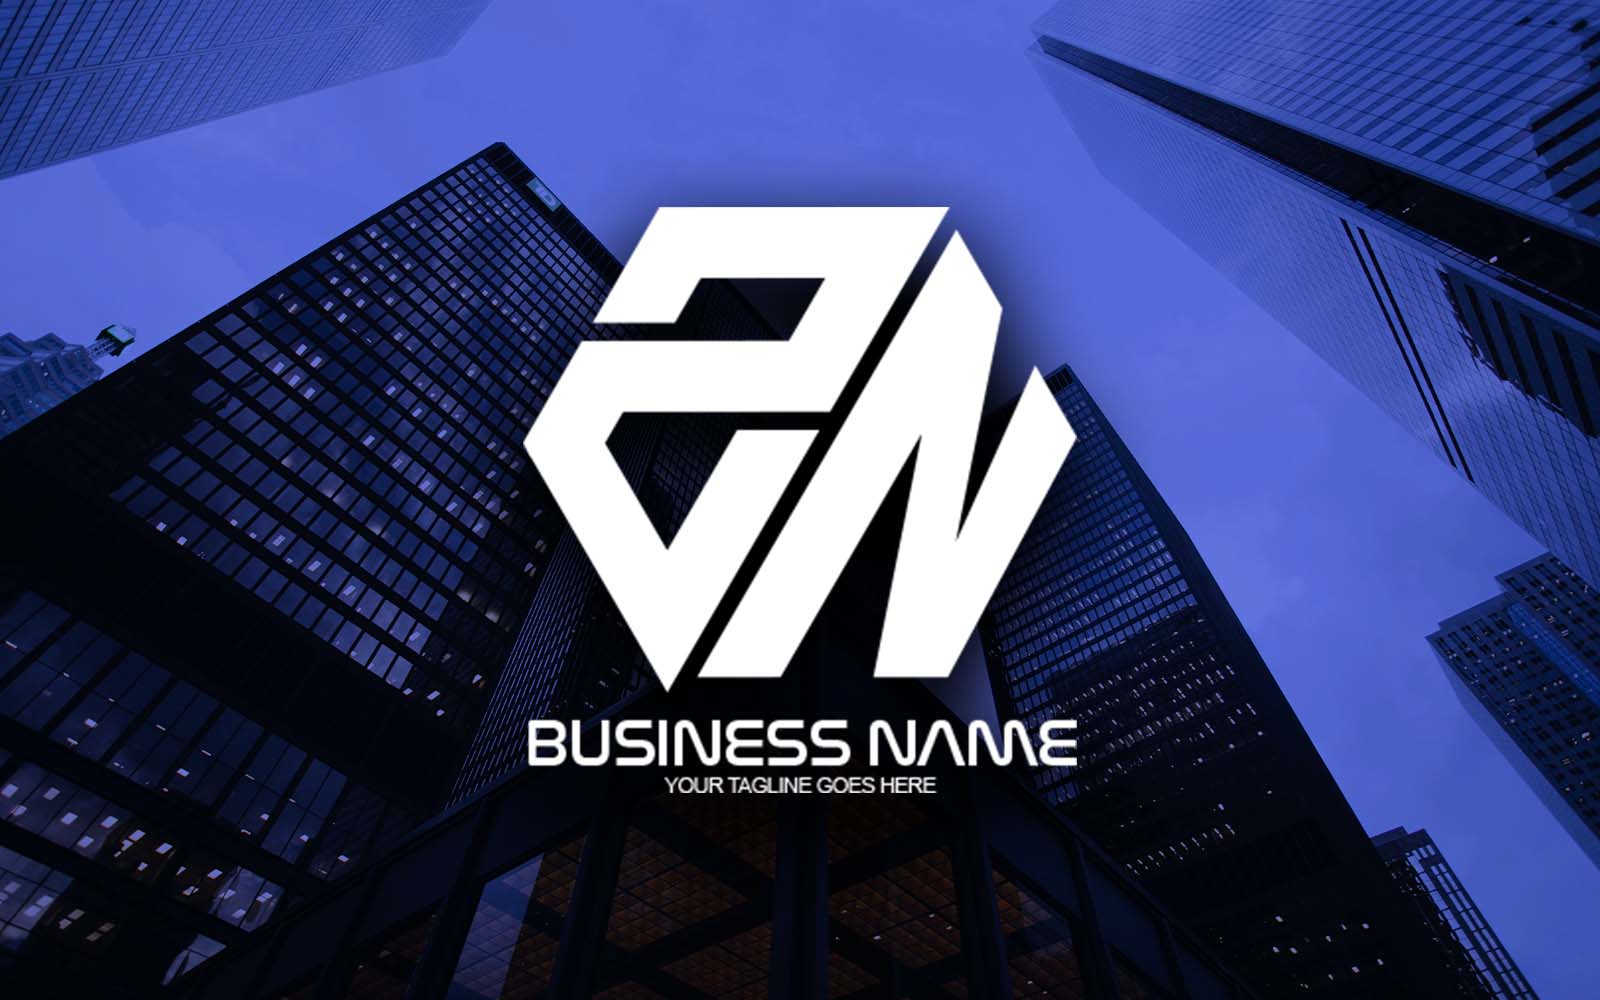 Professional Polygonal ZN Letter Logo Design For Your Business - Brand Identity